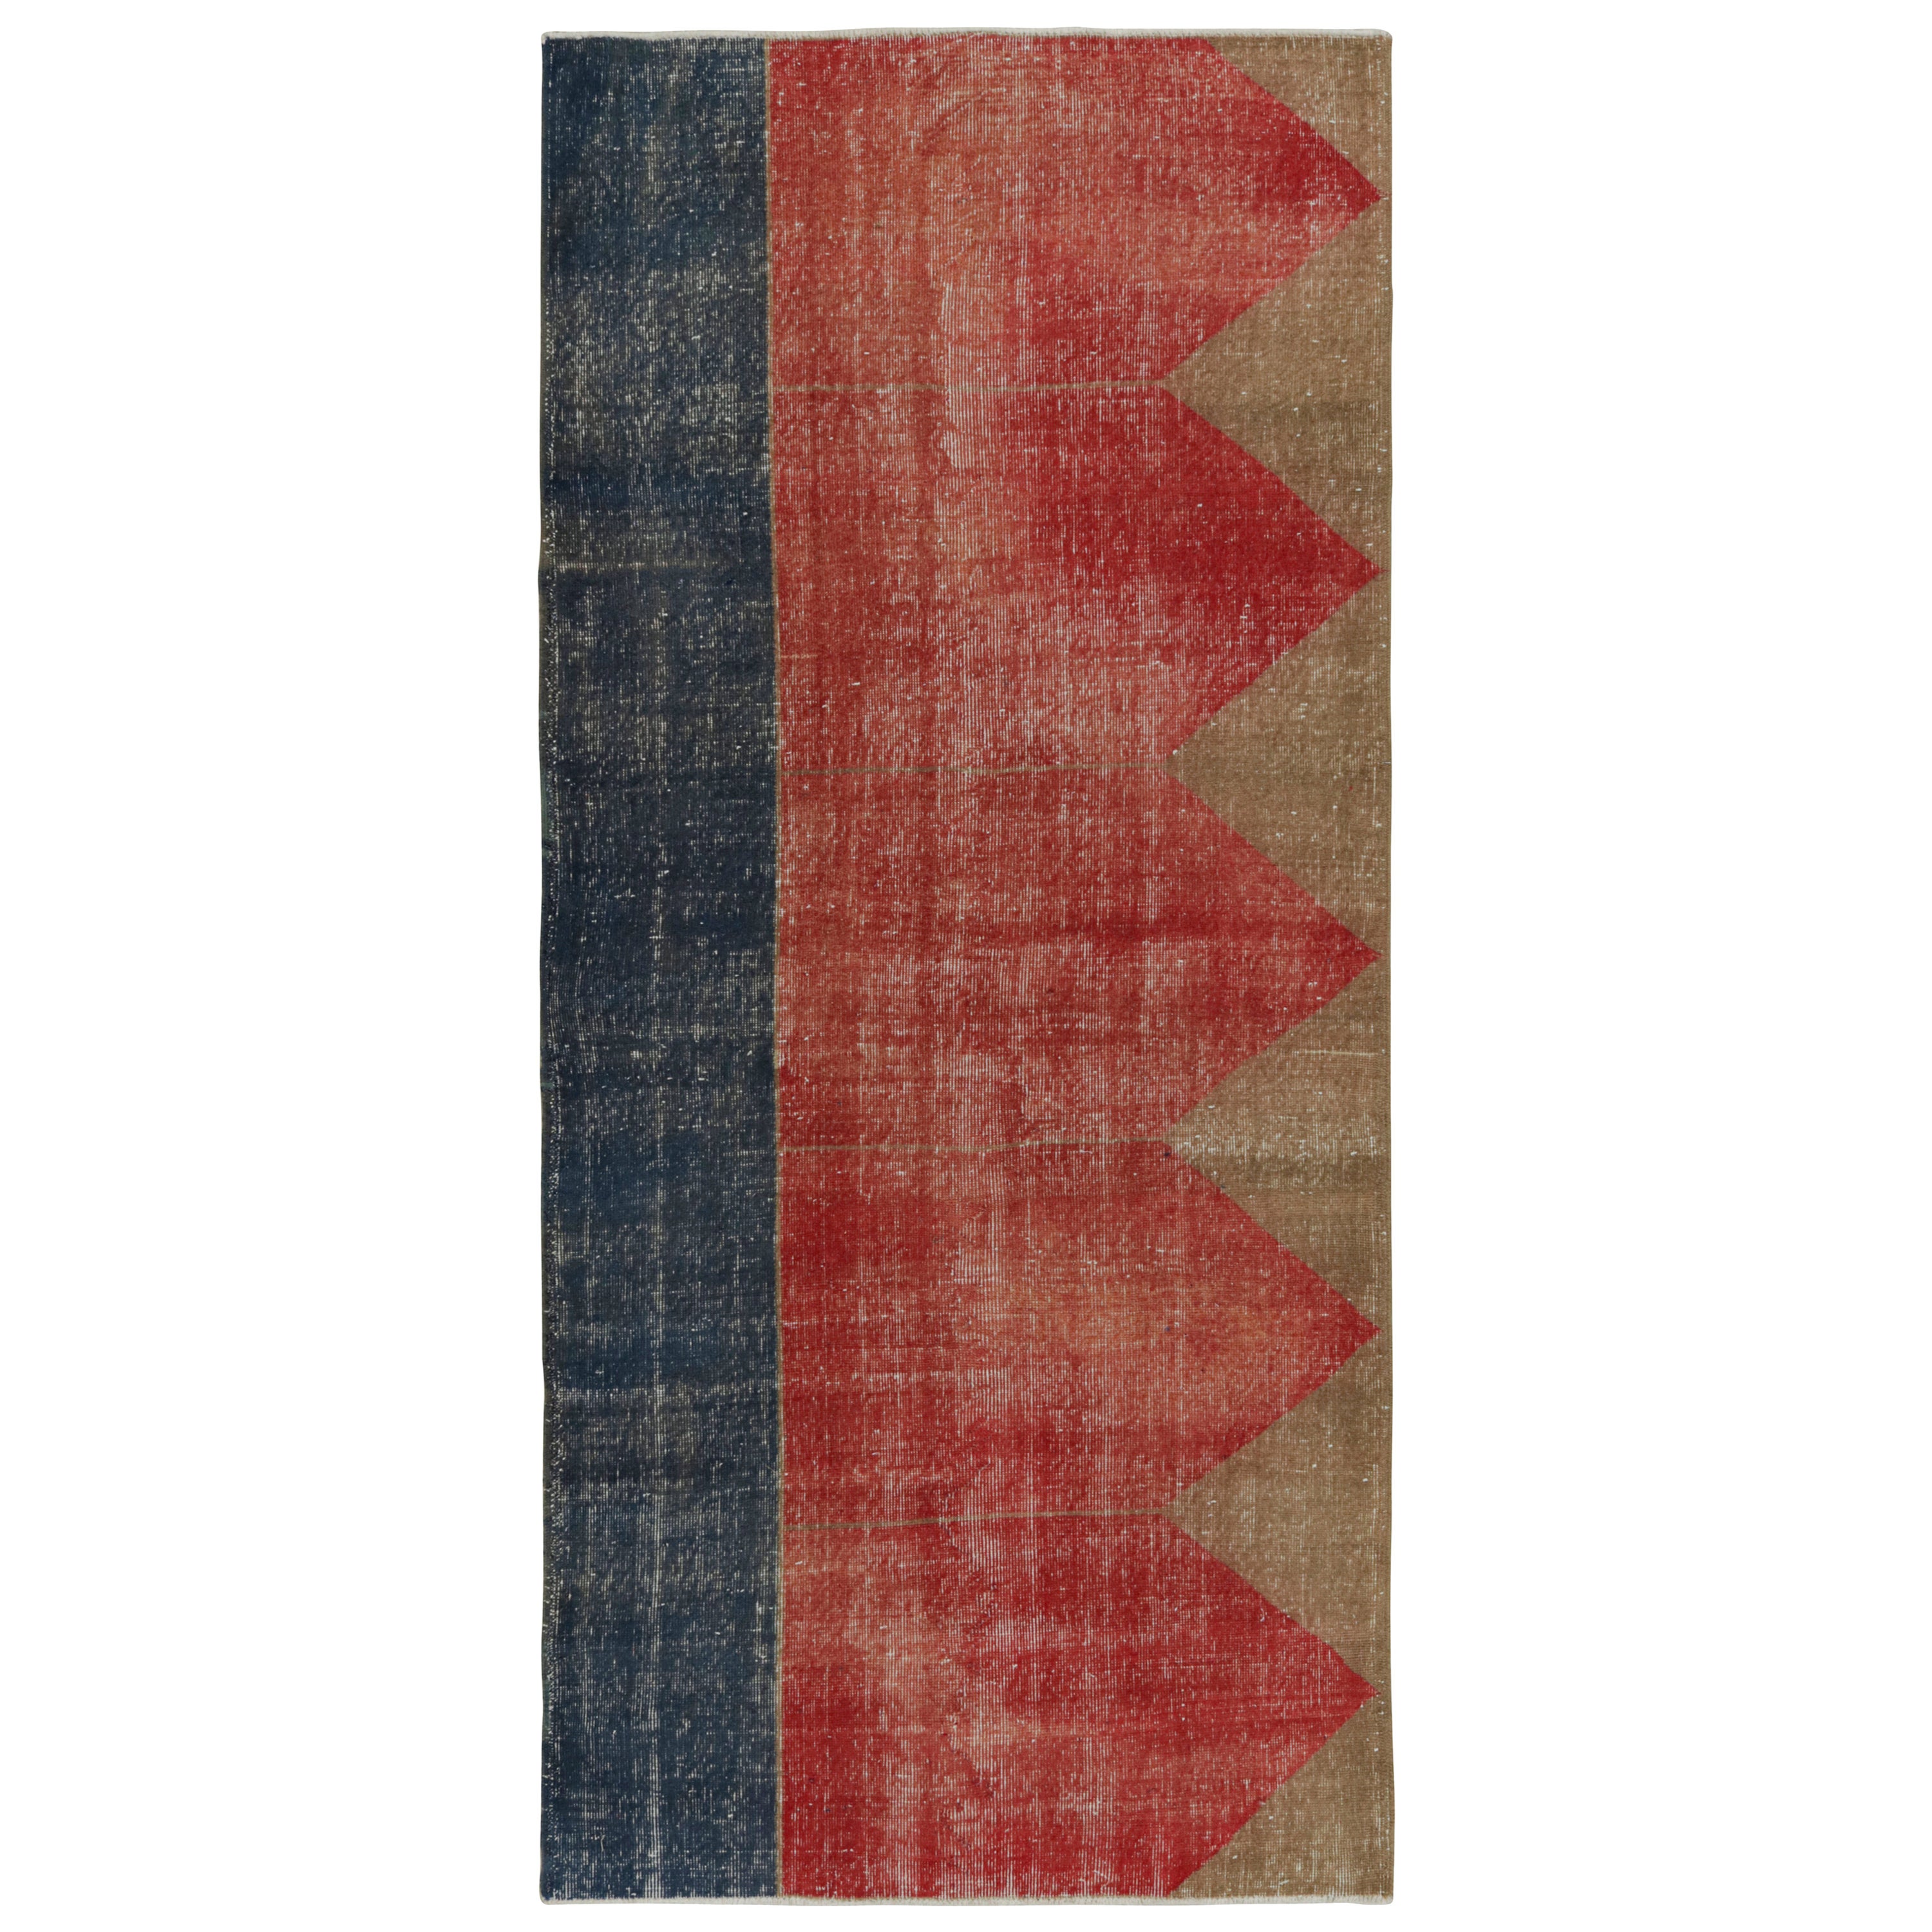 Vintage Turkish Rug in Red, with Geometric Patterns, from Rug & Kilim For Sale